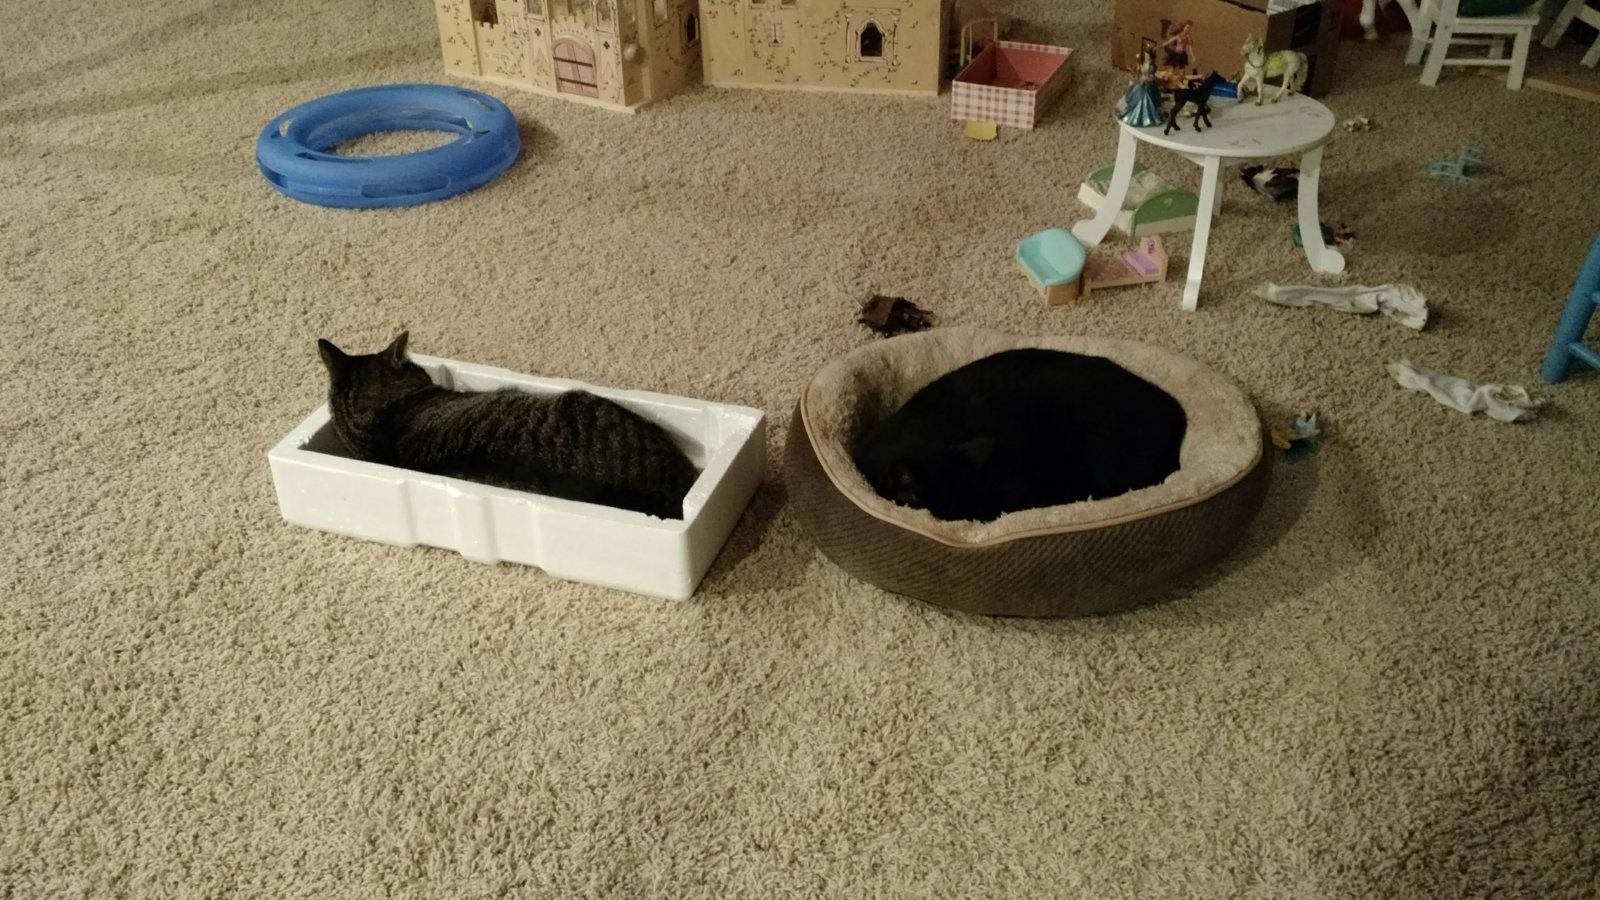 Their preferred resting places.